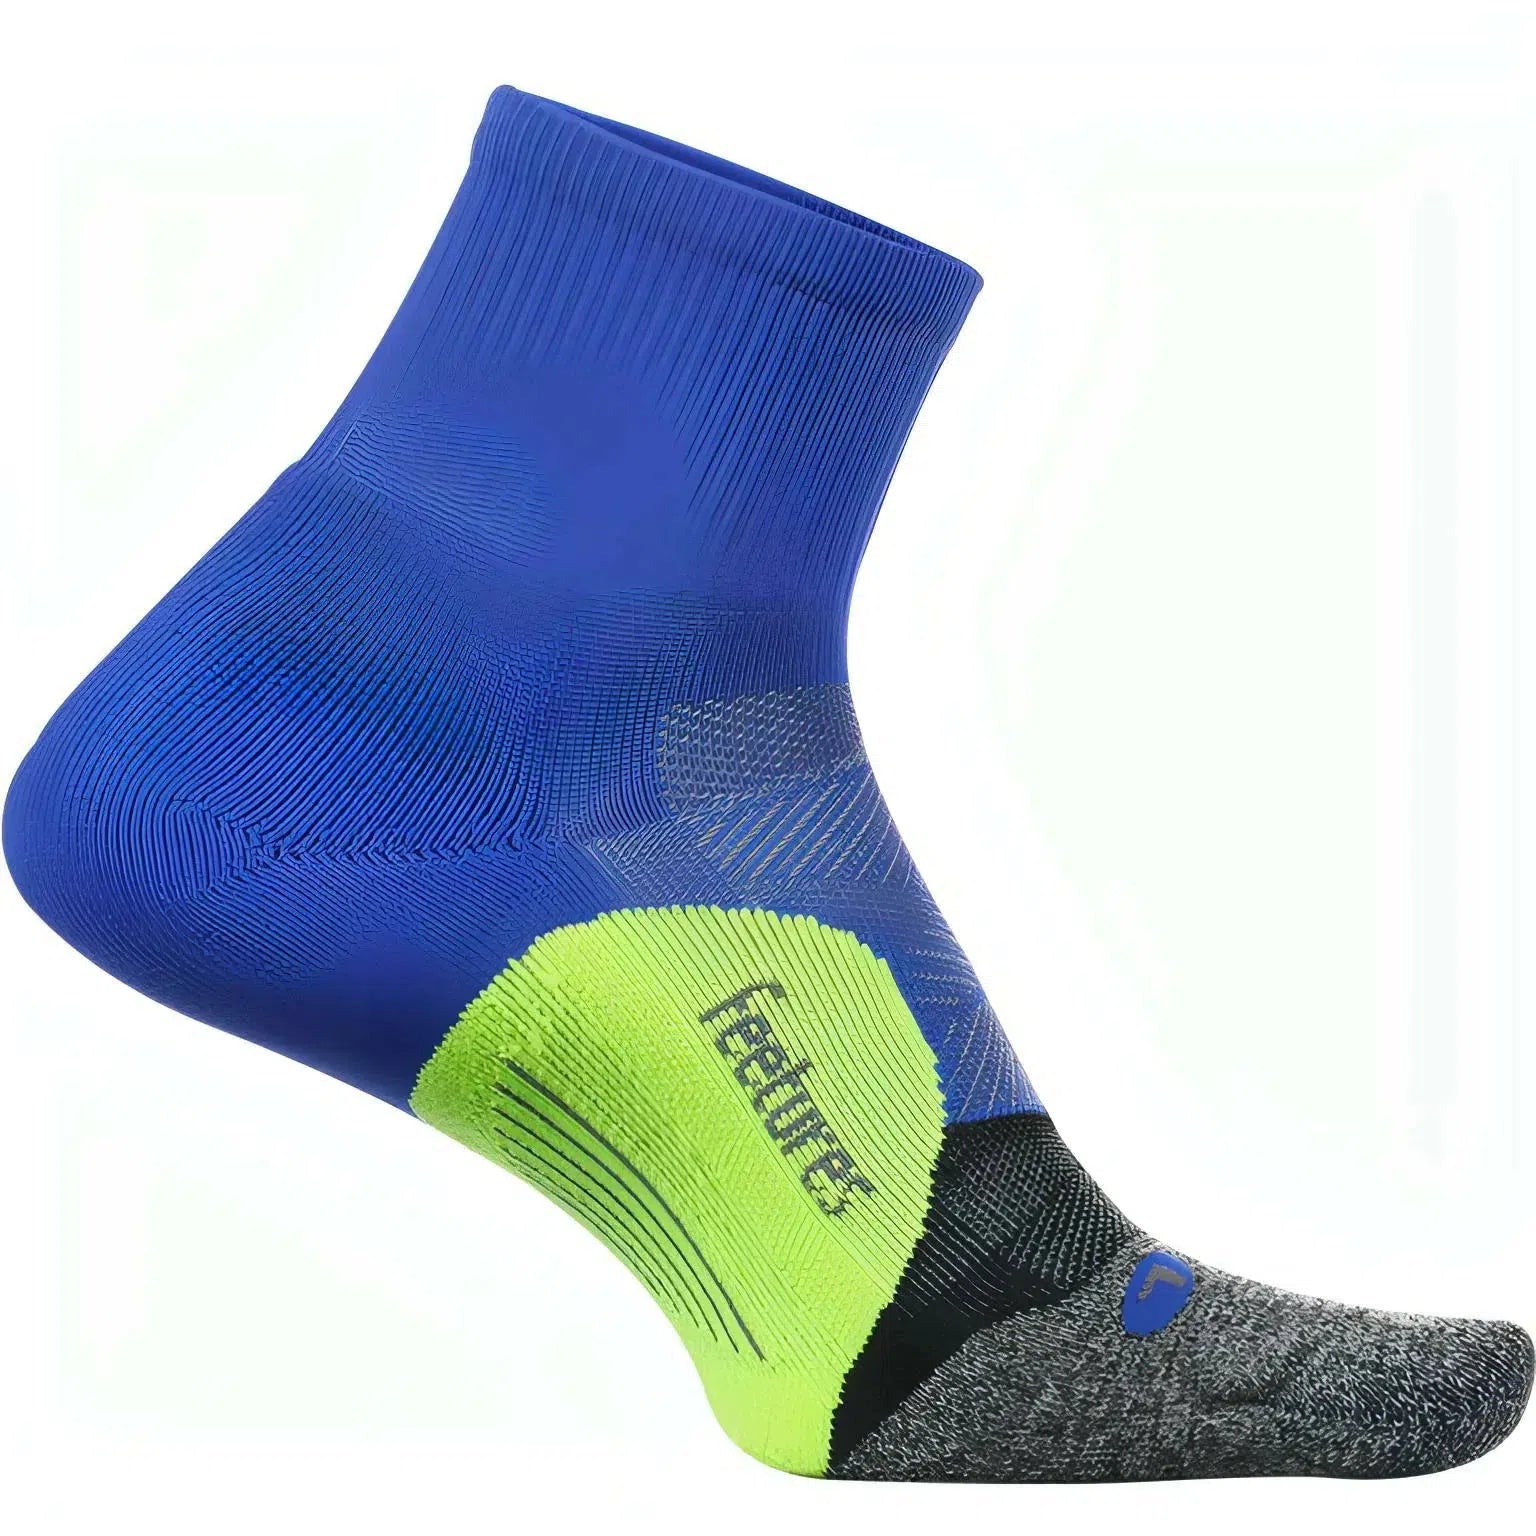 Feetures-Feetures Elite Light Cushion Quarter Length-Boost Blue-Pacers Running